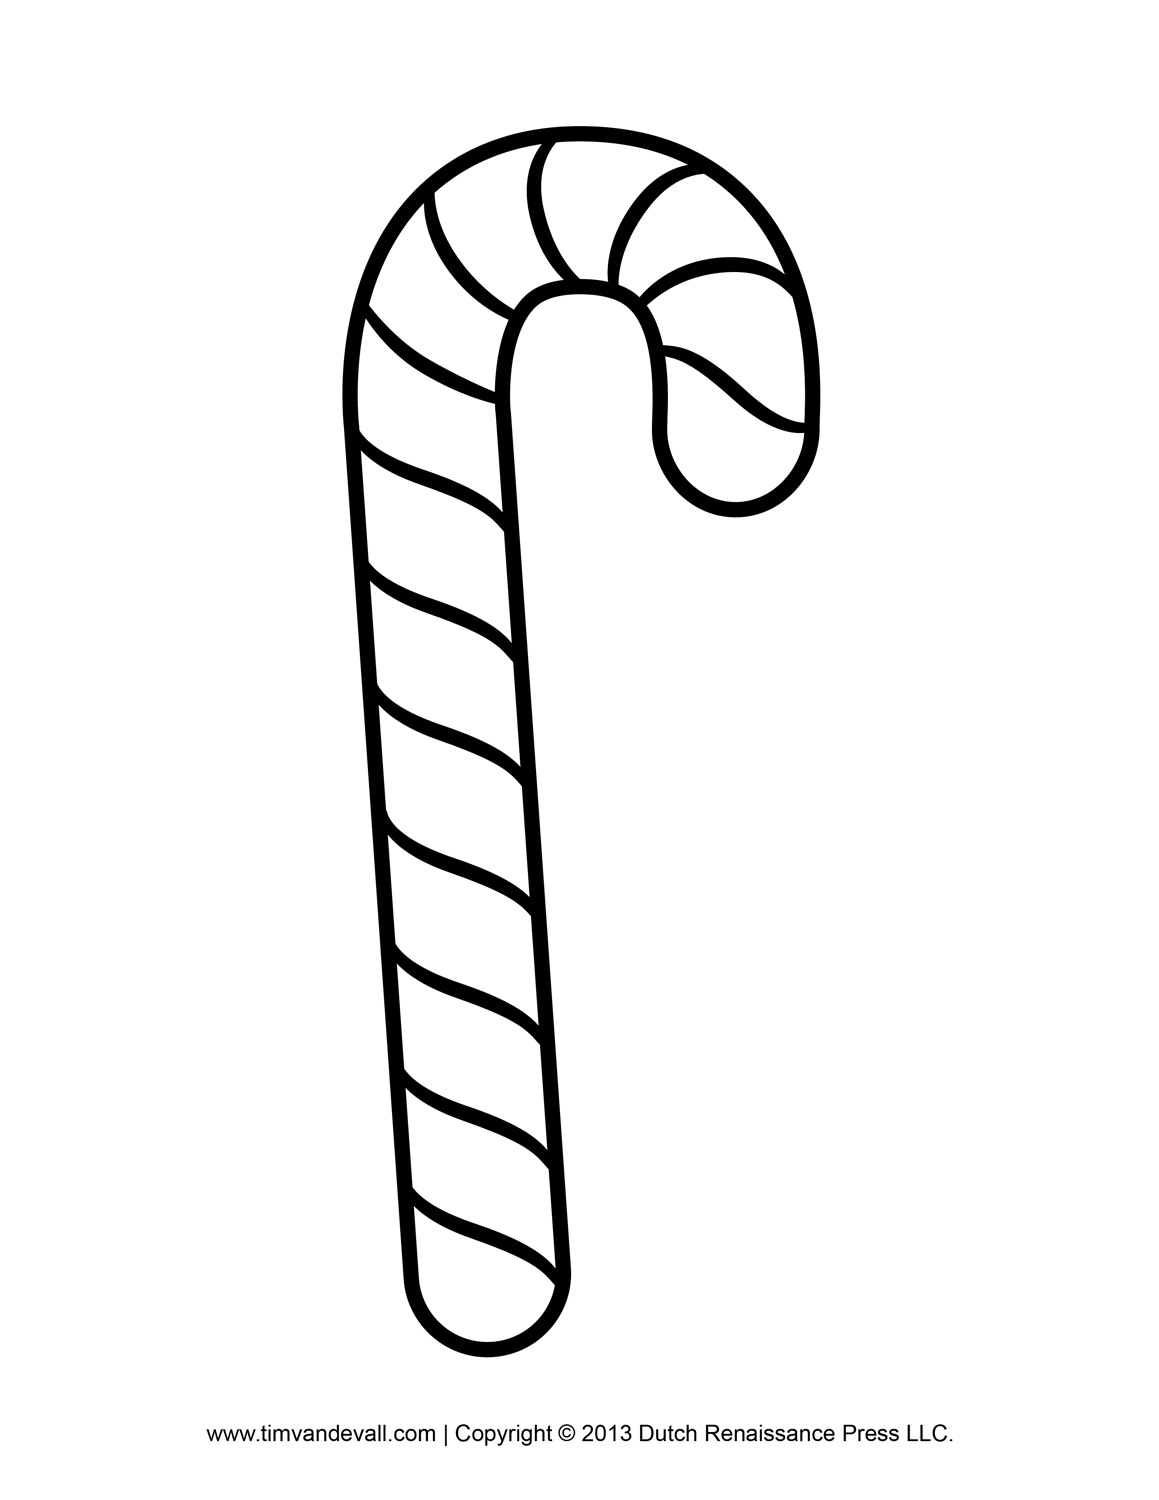 Candy Cane Outline Printable